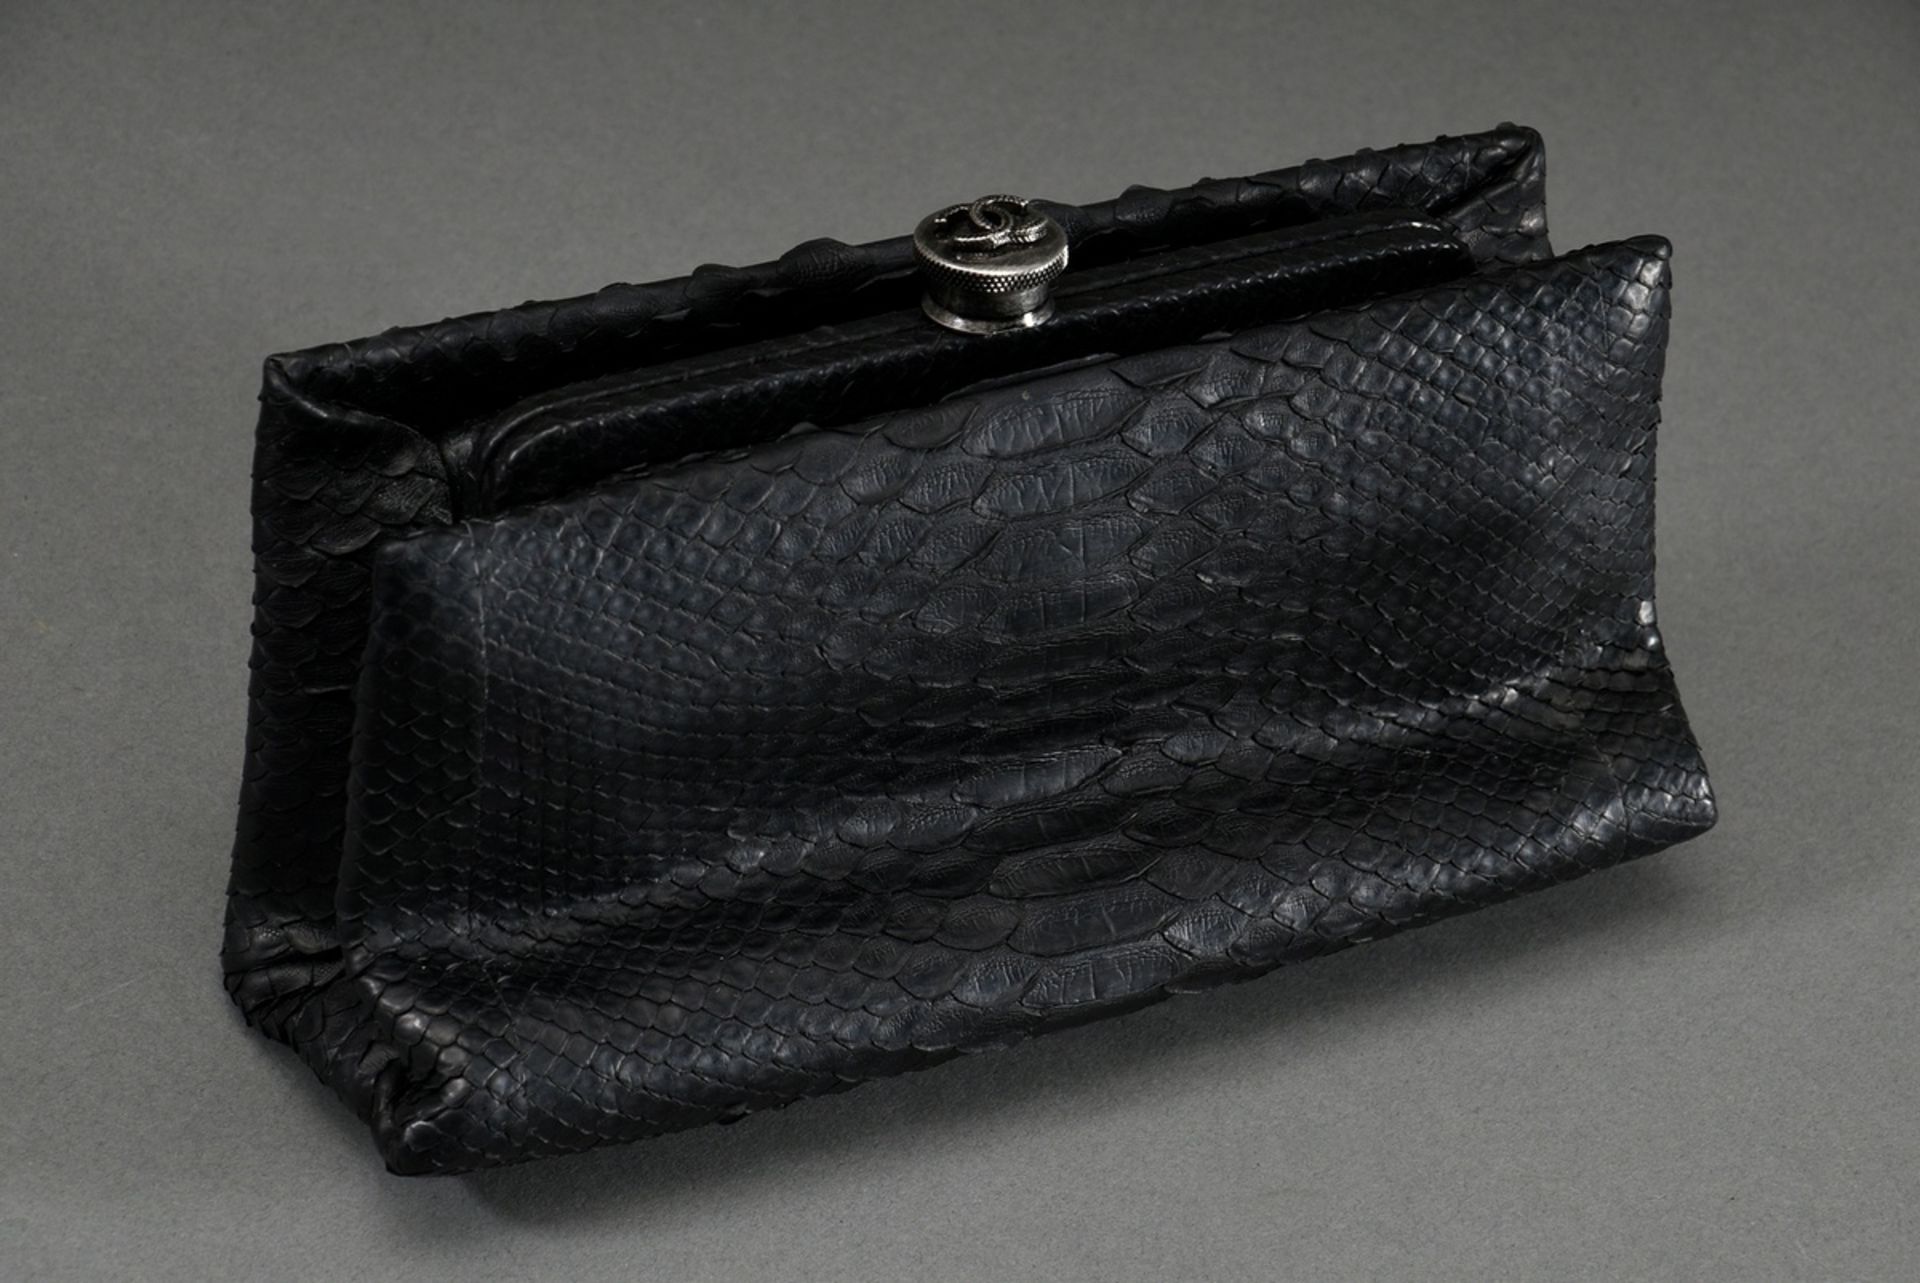 Chanel clutch in black python leather with silver metal logo clasp, black silk lining, Collection 2 - Image 5 of 5